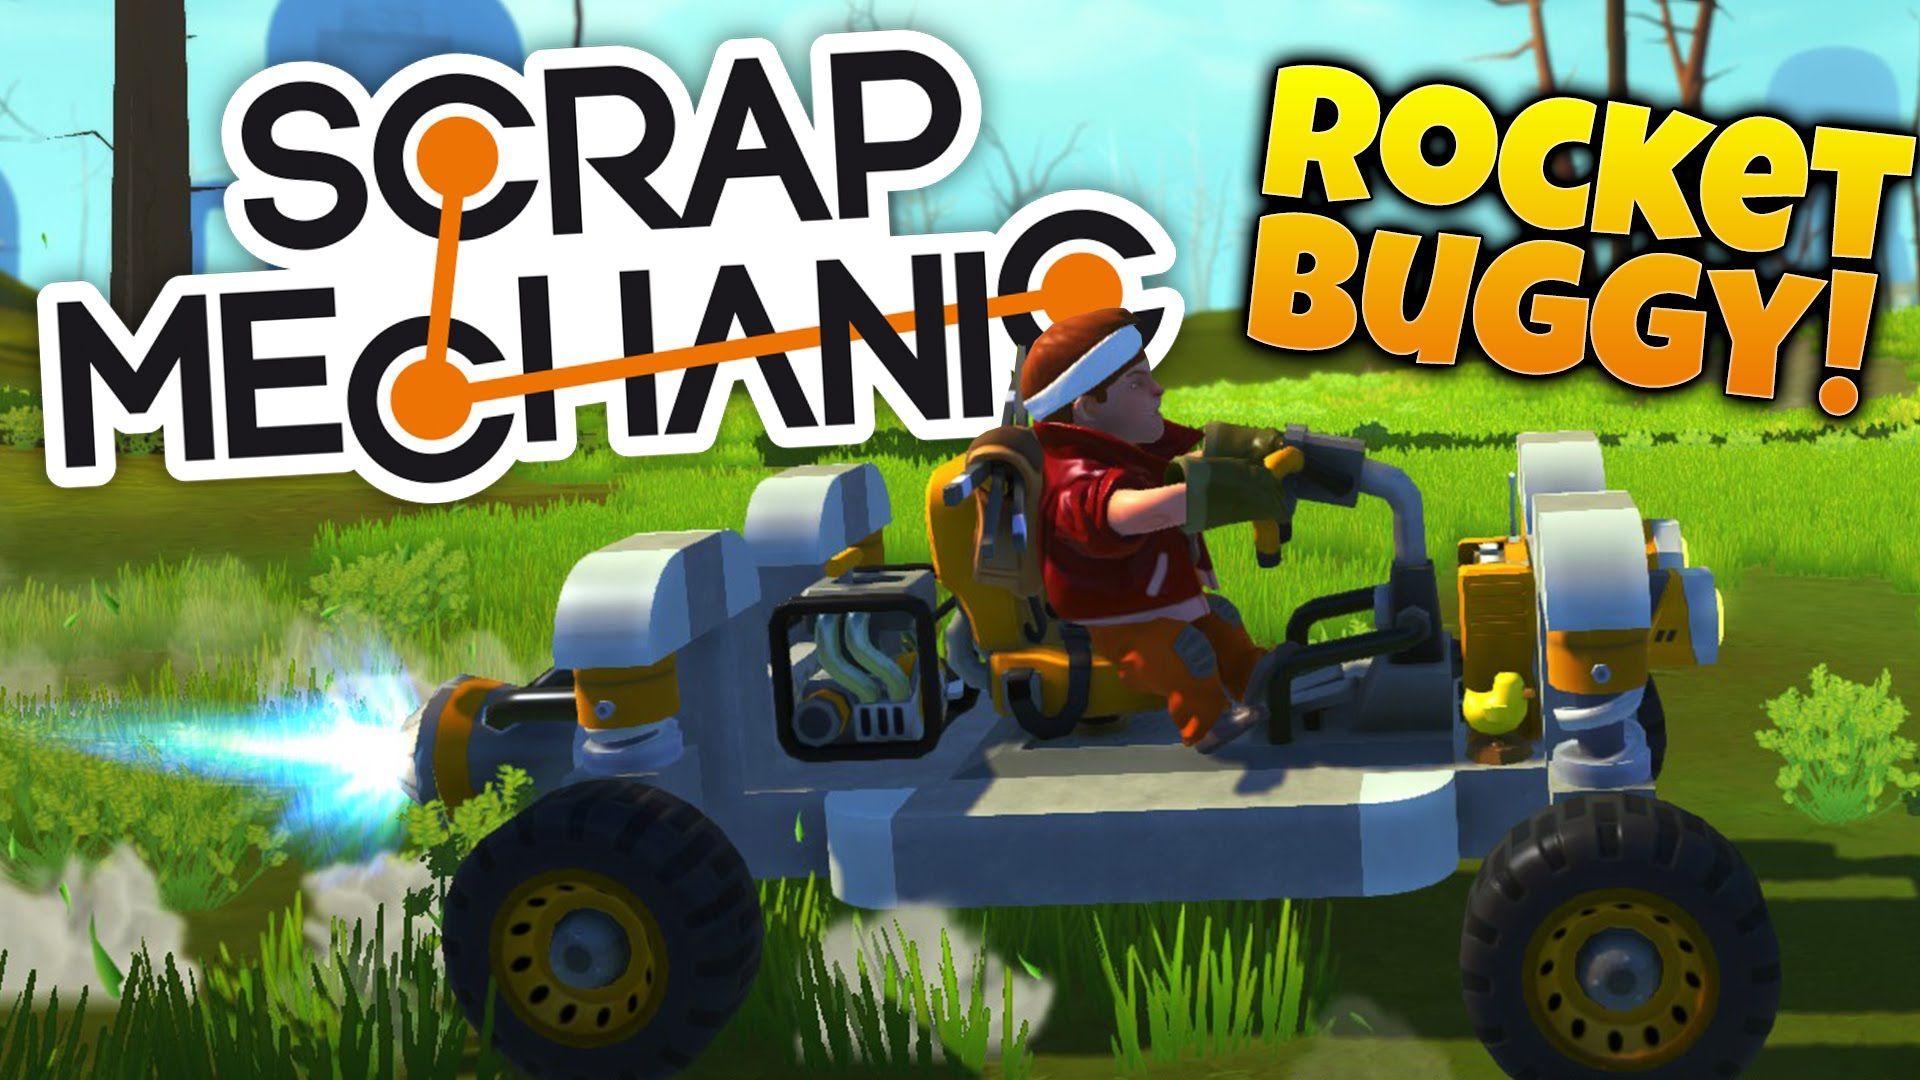 Scrap Mechanic Gameplay A ROCKET BUGGY! Let's Play